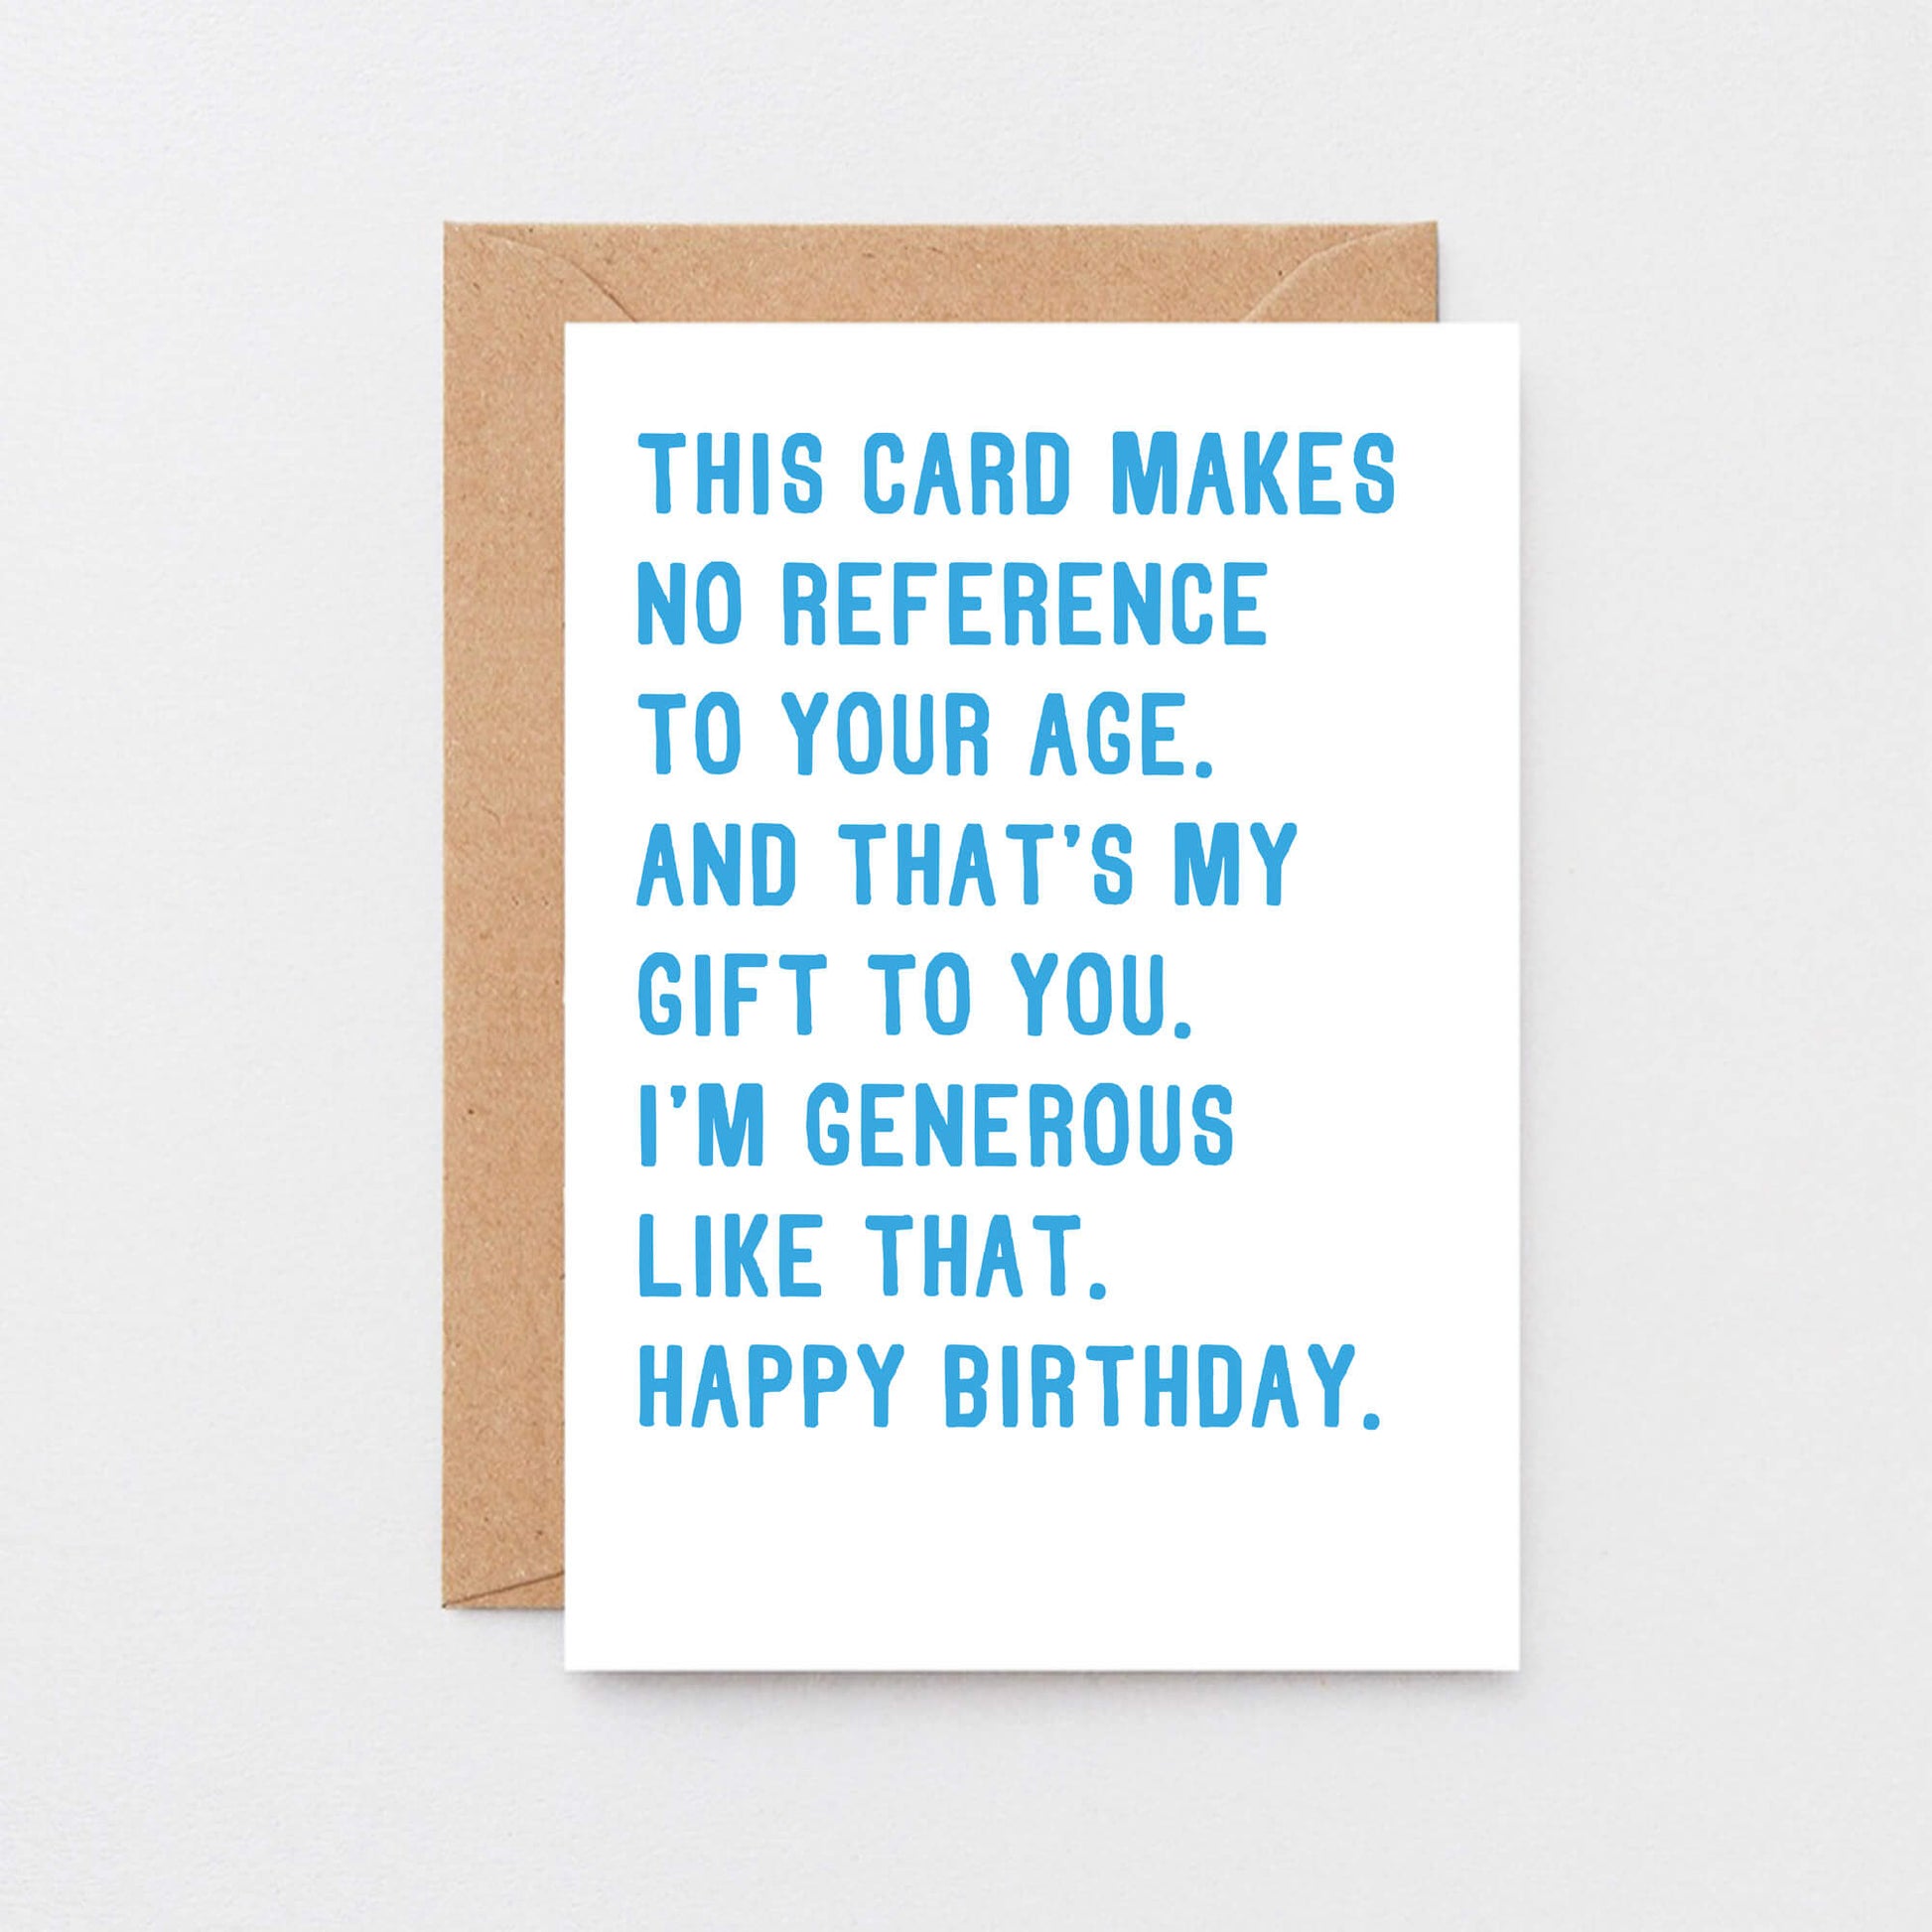 Birthday Card by SixElevenCreations. Reads This card makes no reference to your age. And that's my gift to you. I'm generous like that. Happy birthday. Product Code SE2043A6